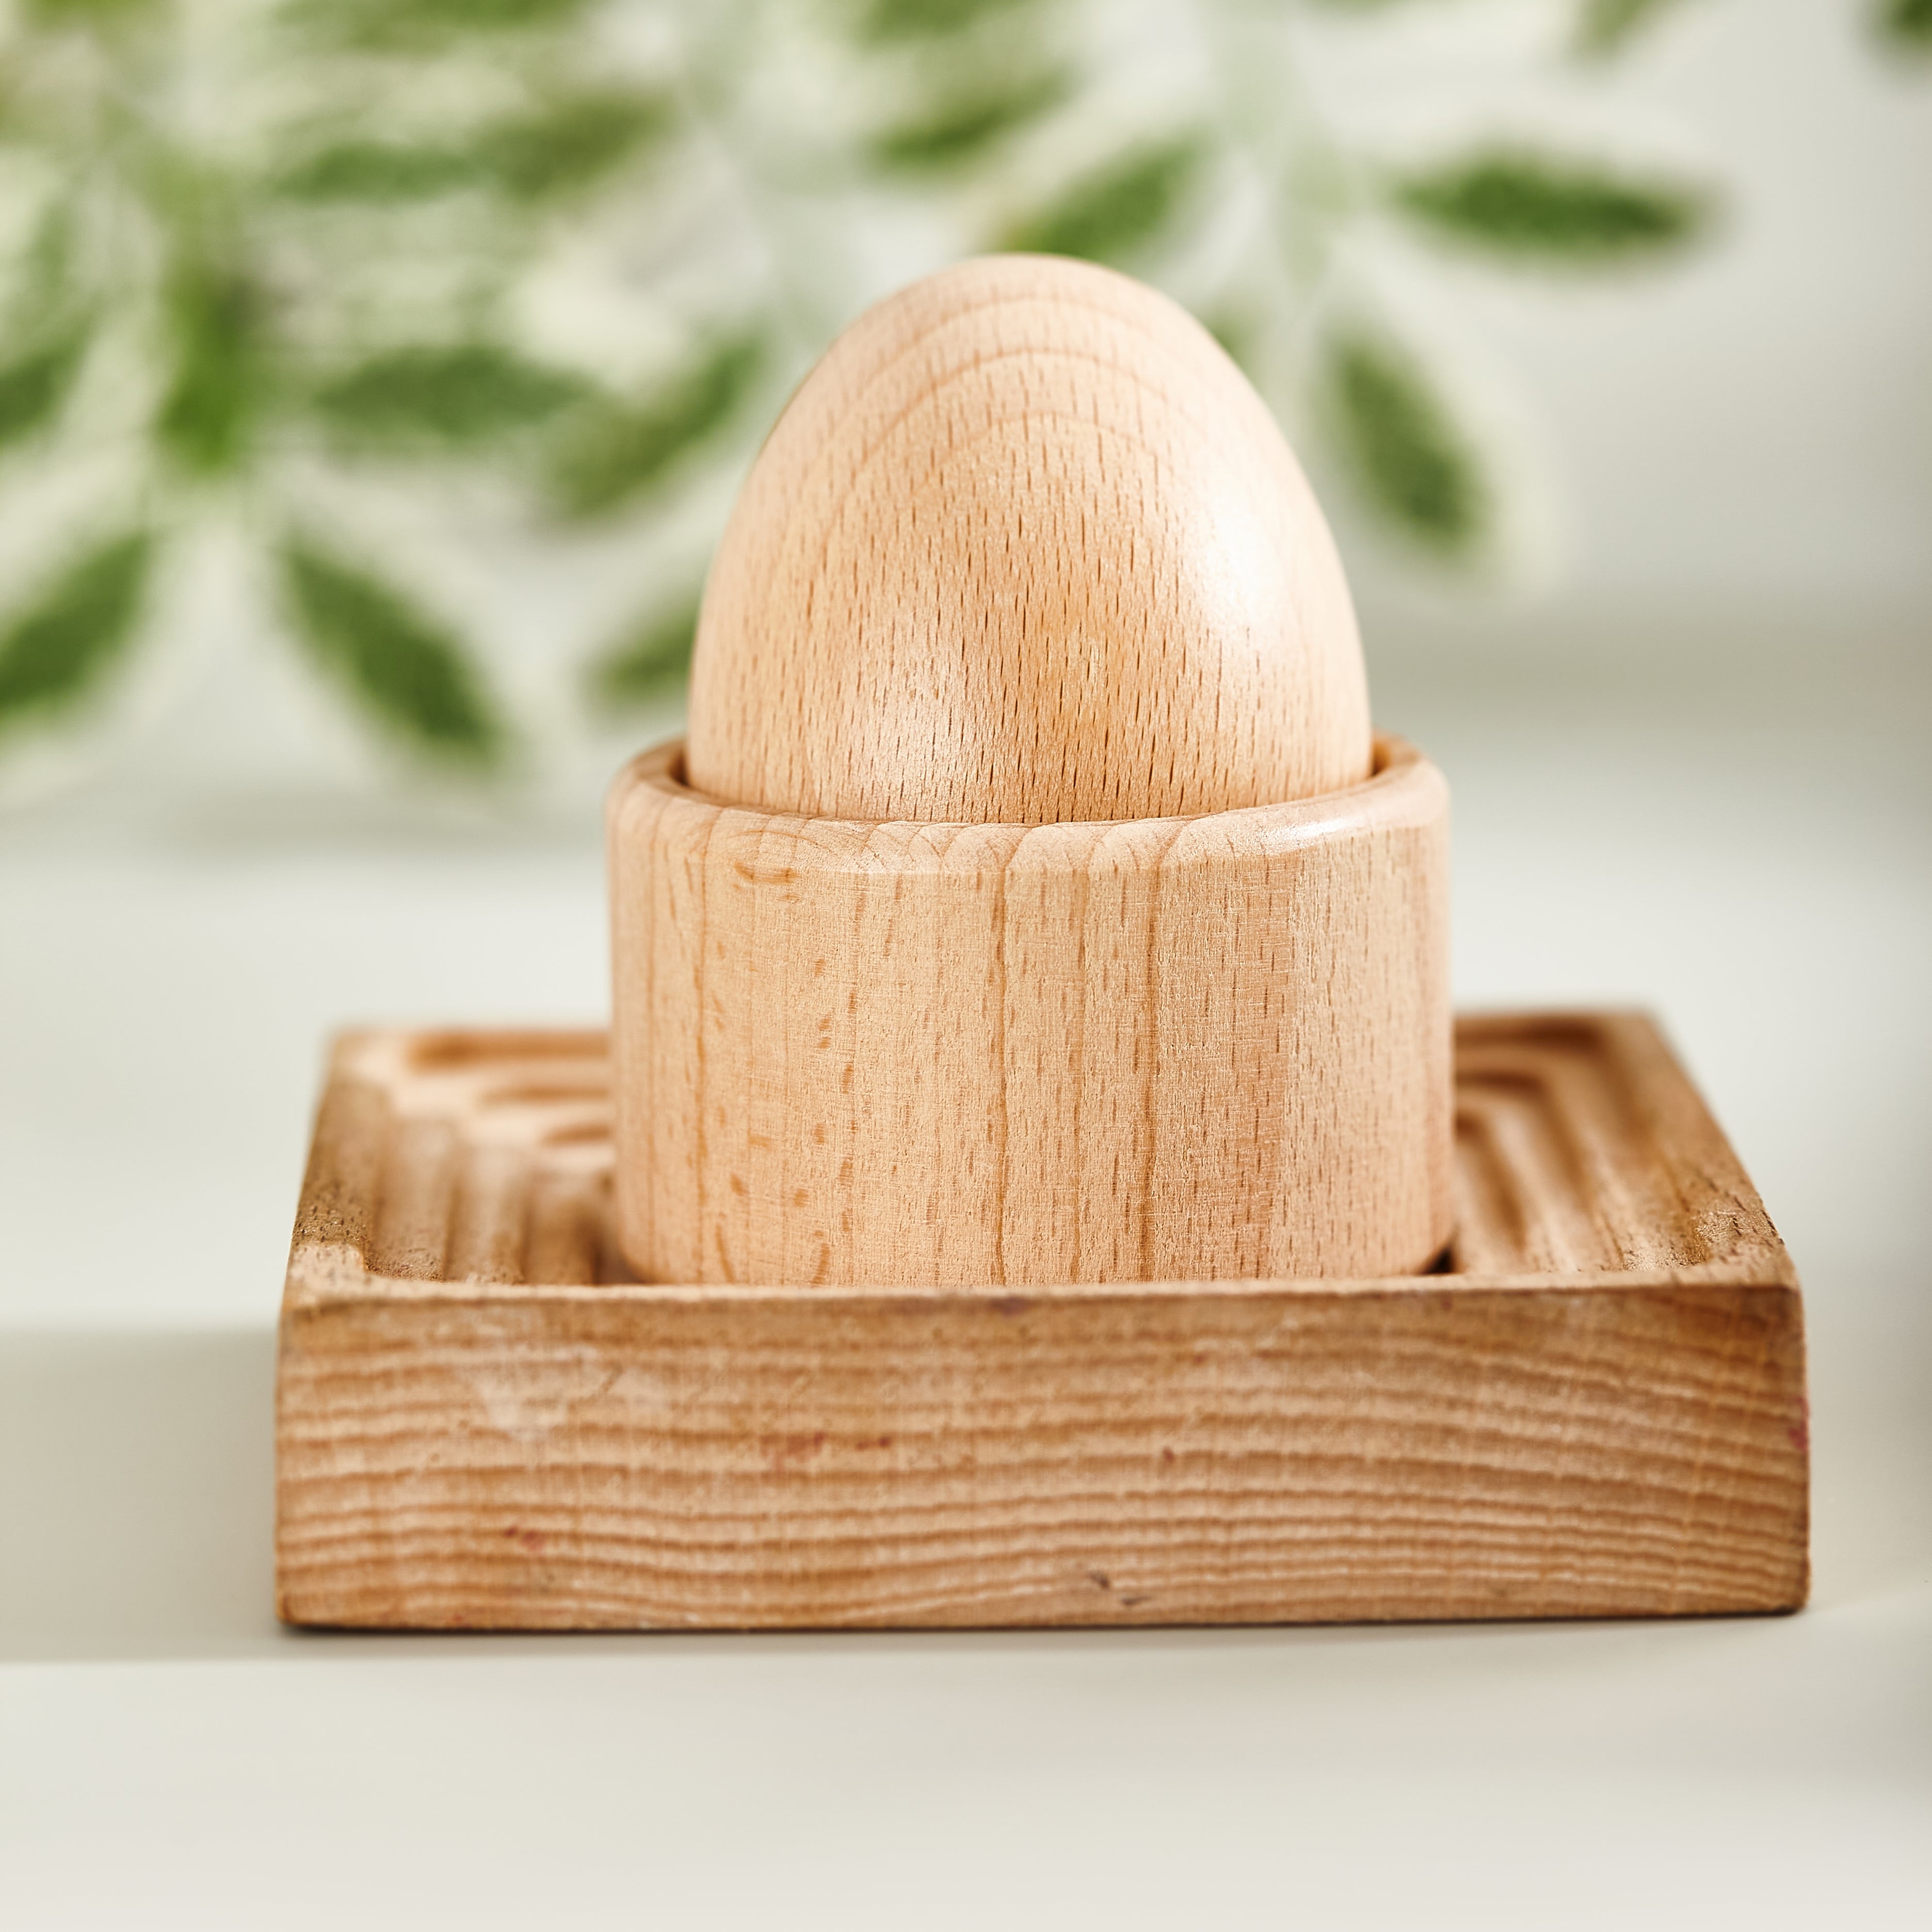 Montessori wooden toy egg with cup